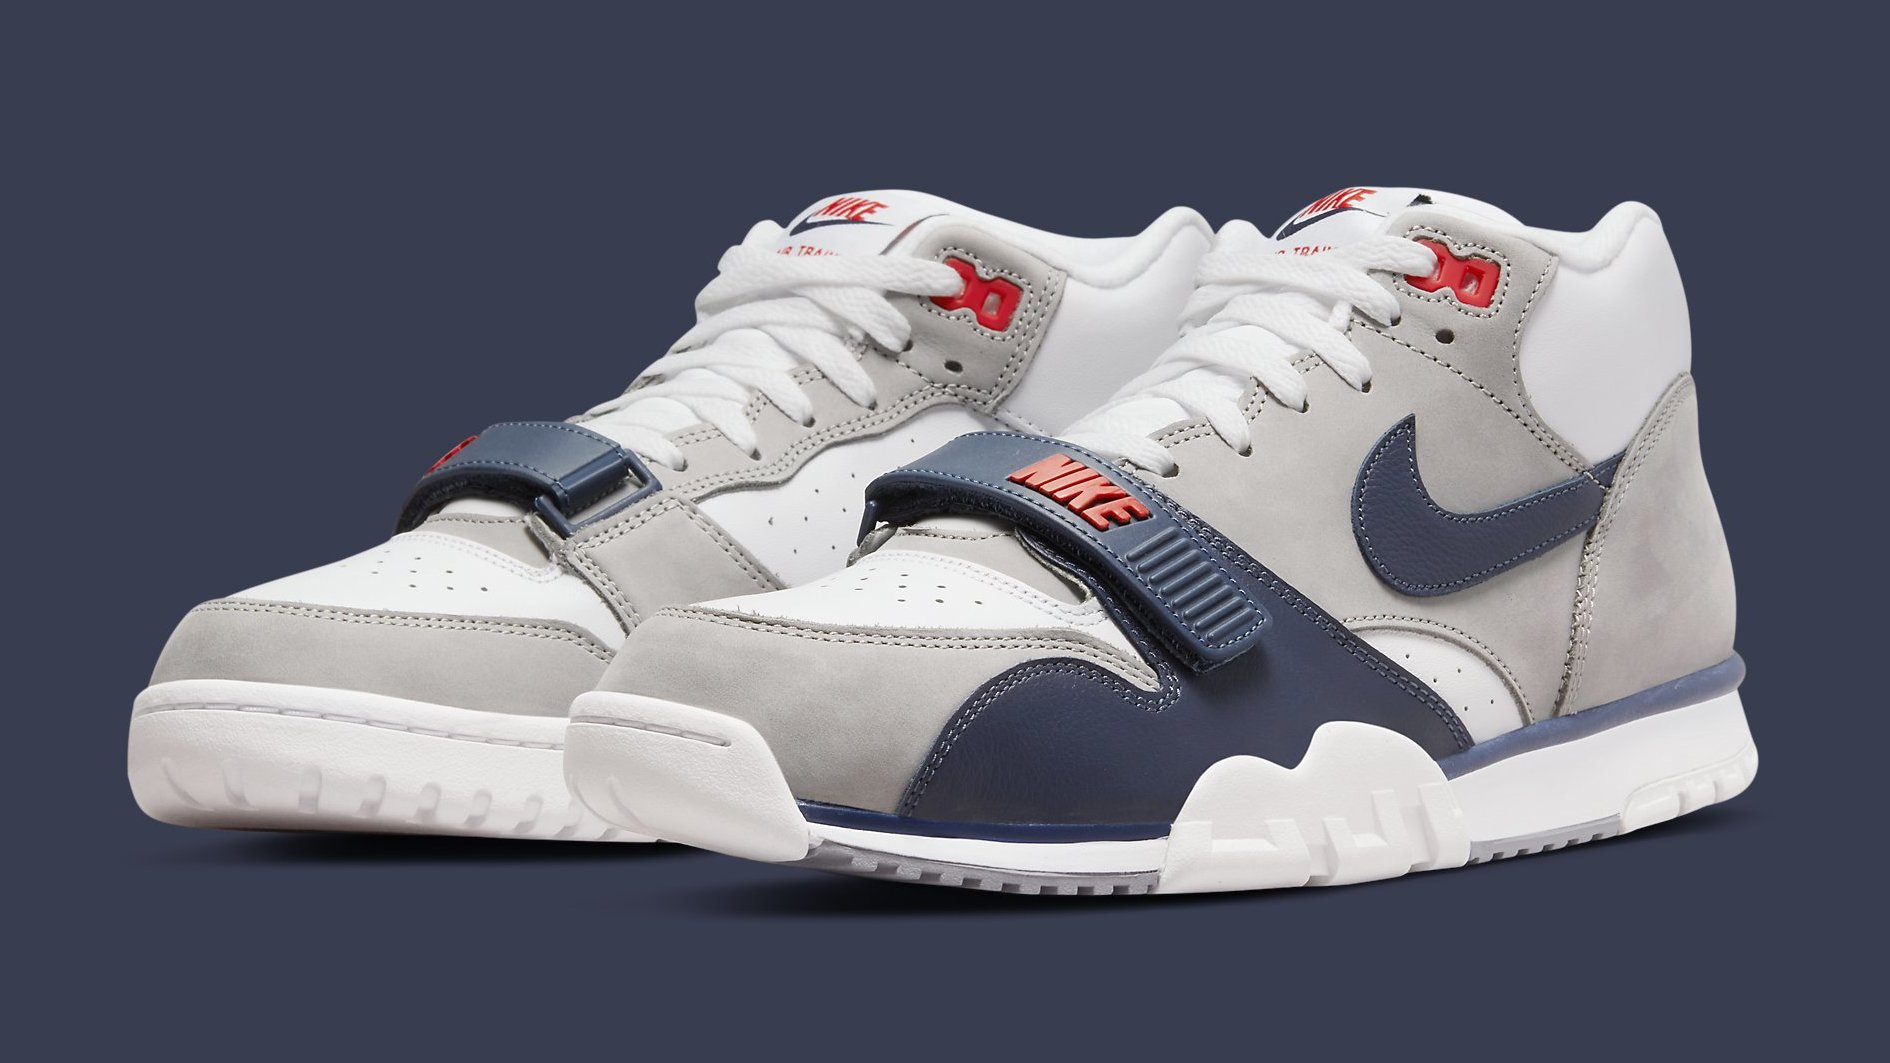 Nike Air Trainer 1 White/Midnight Navy Release Date DM0521-101 